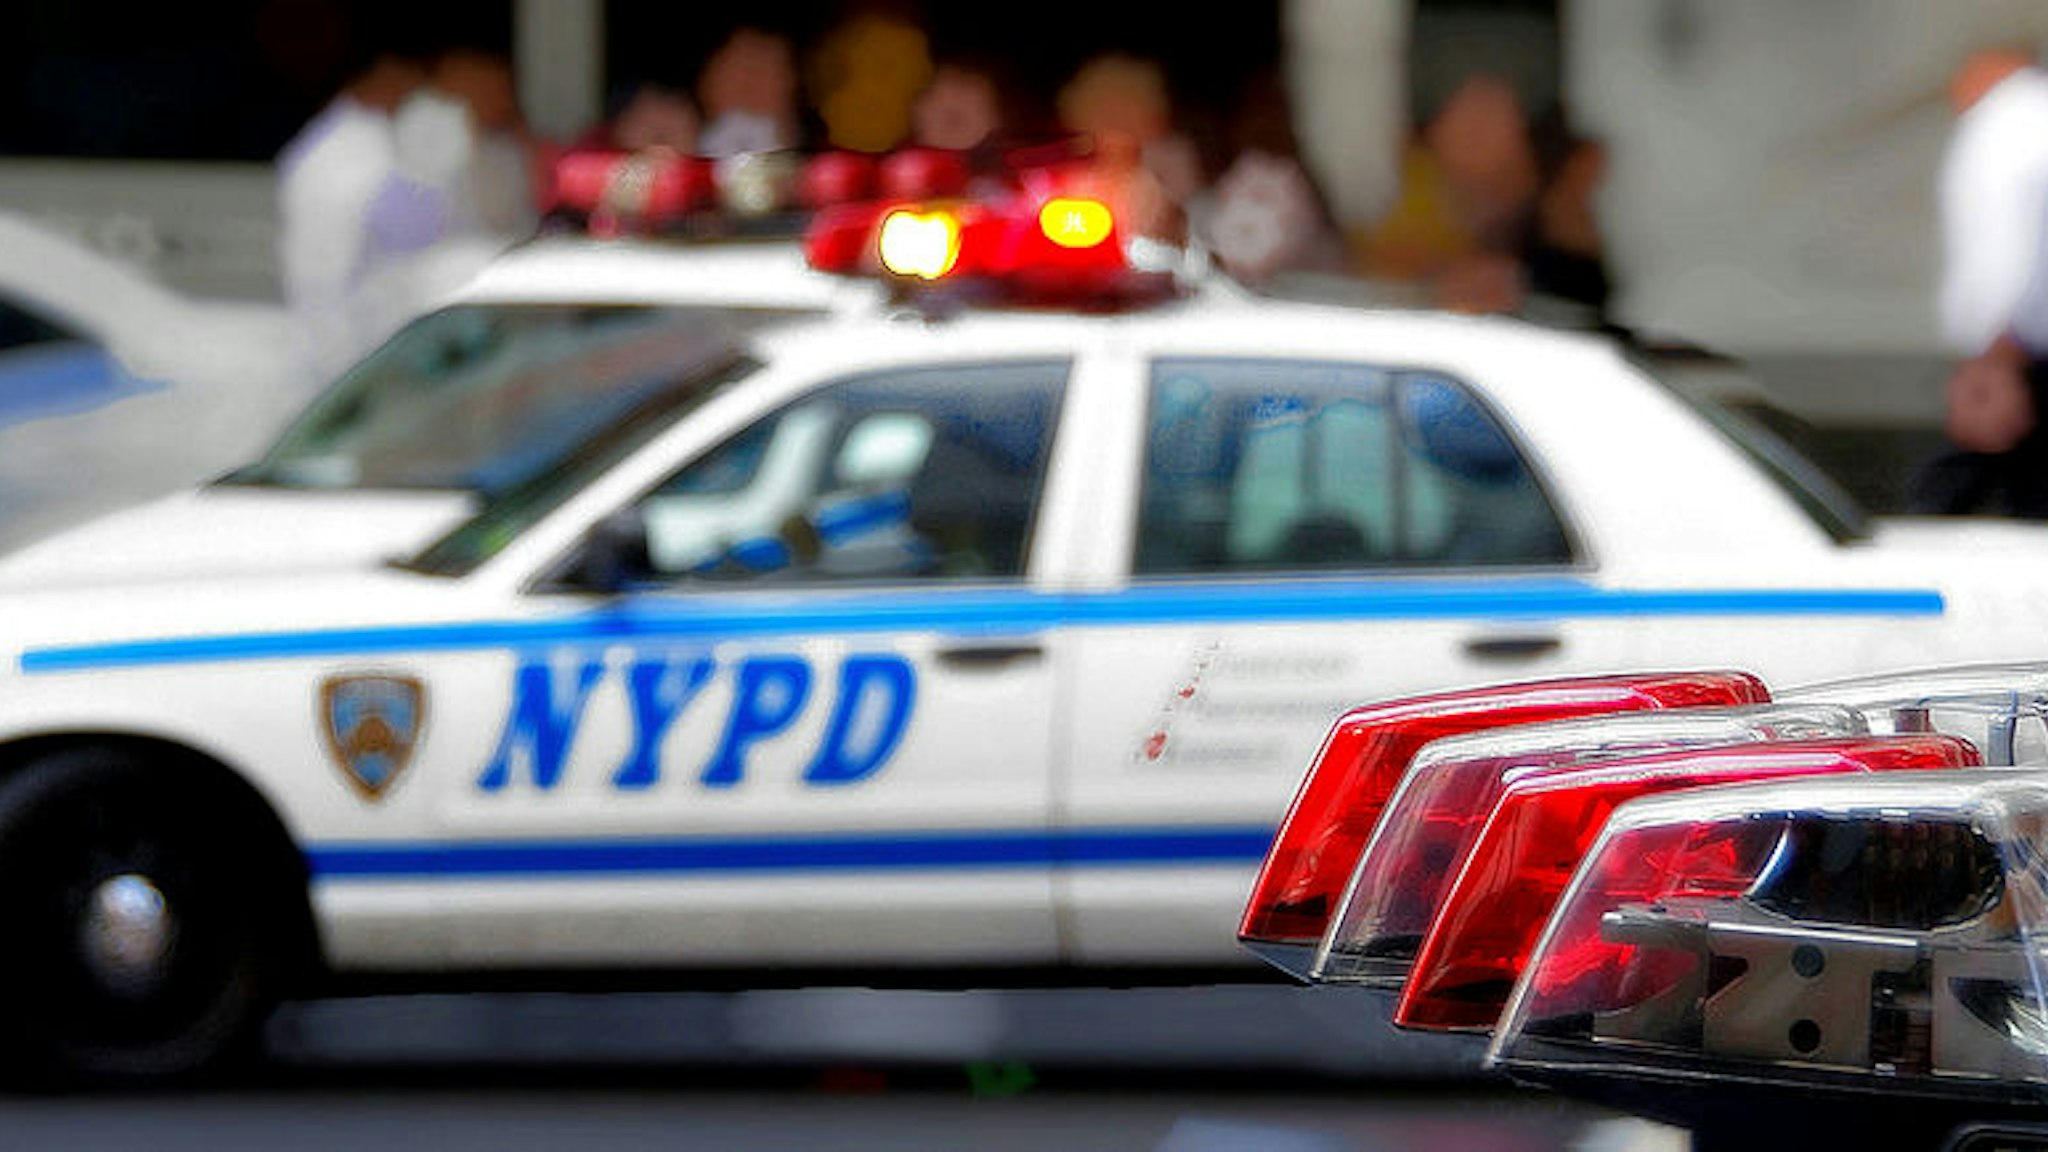 [UNVERIFIED CONTENT] Perspective view on NYPD Patrol Cars Lights and Sirens (Getty Images)